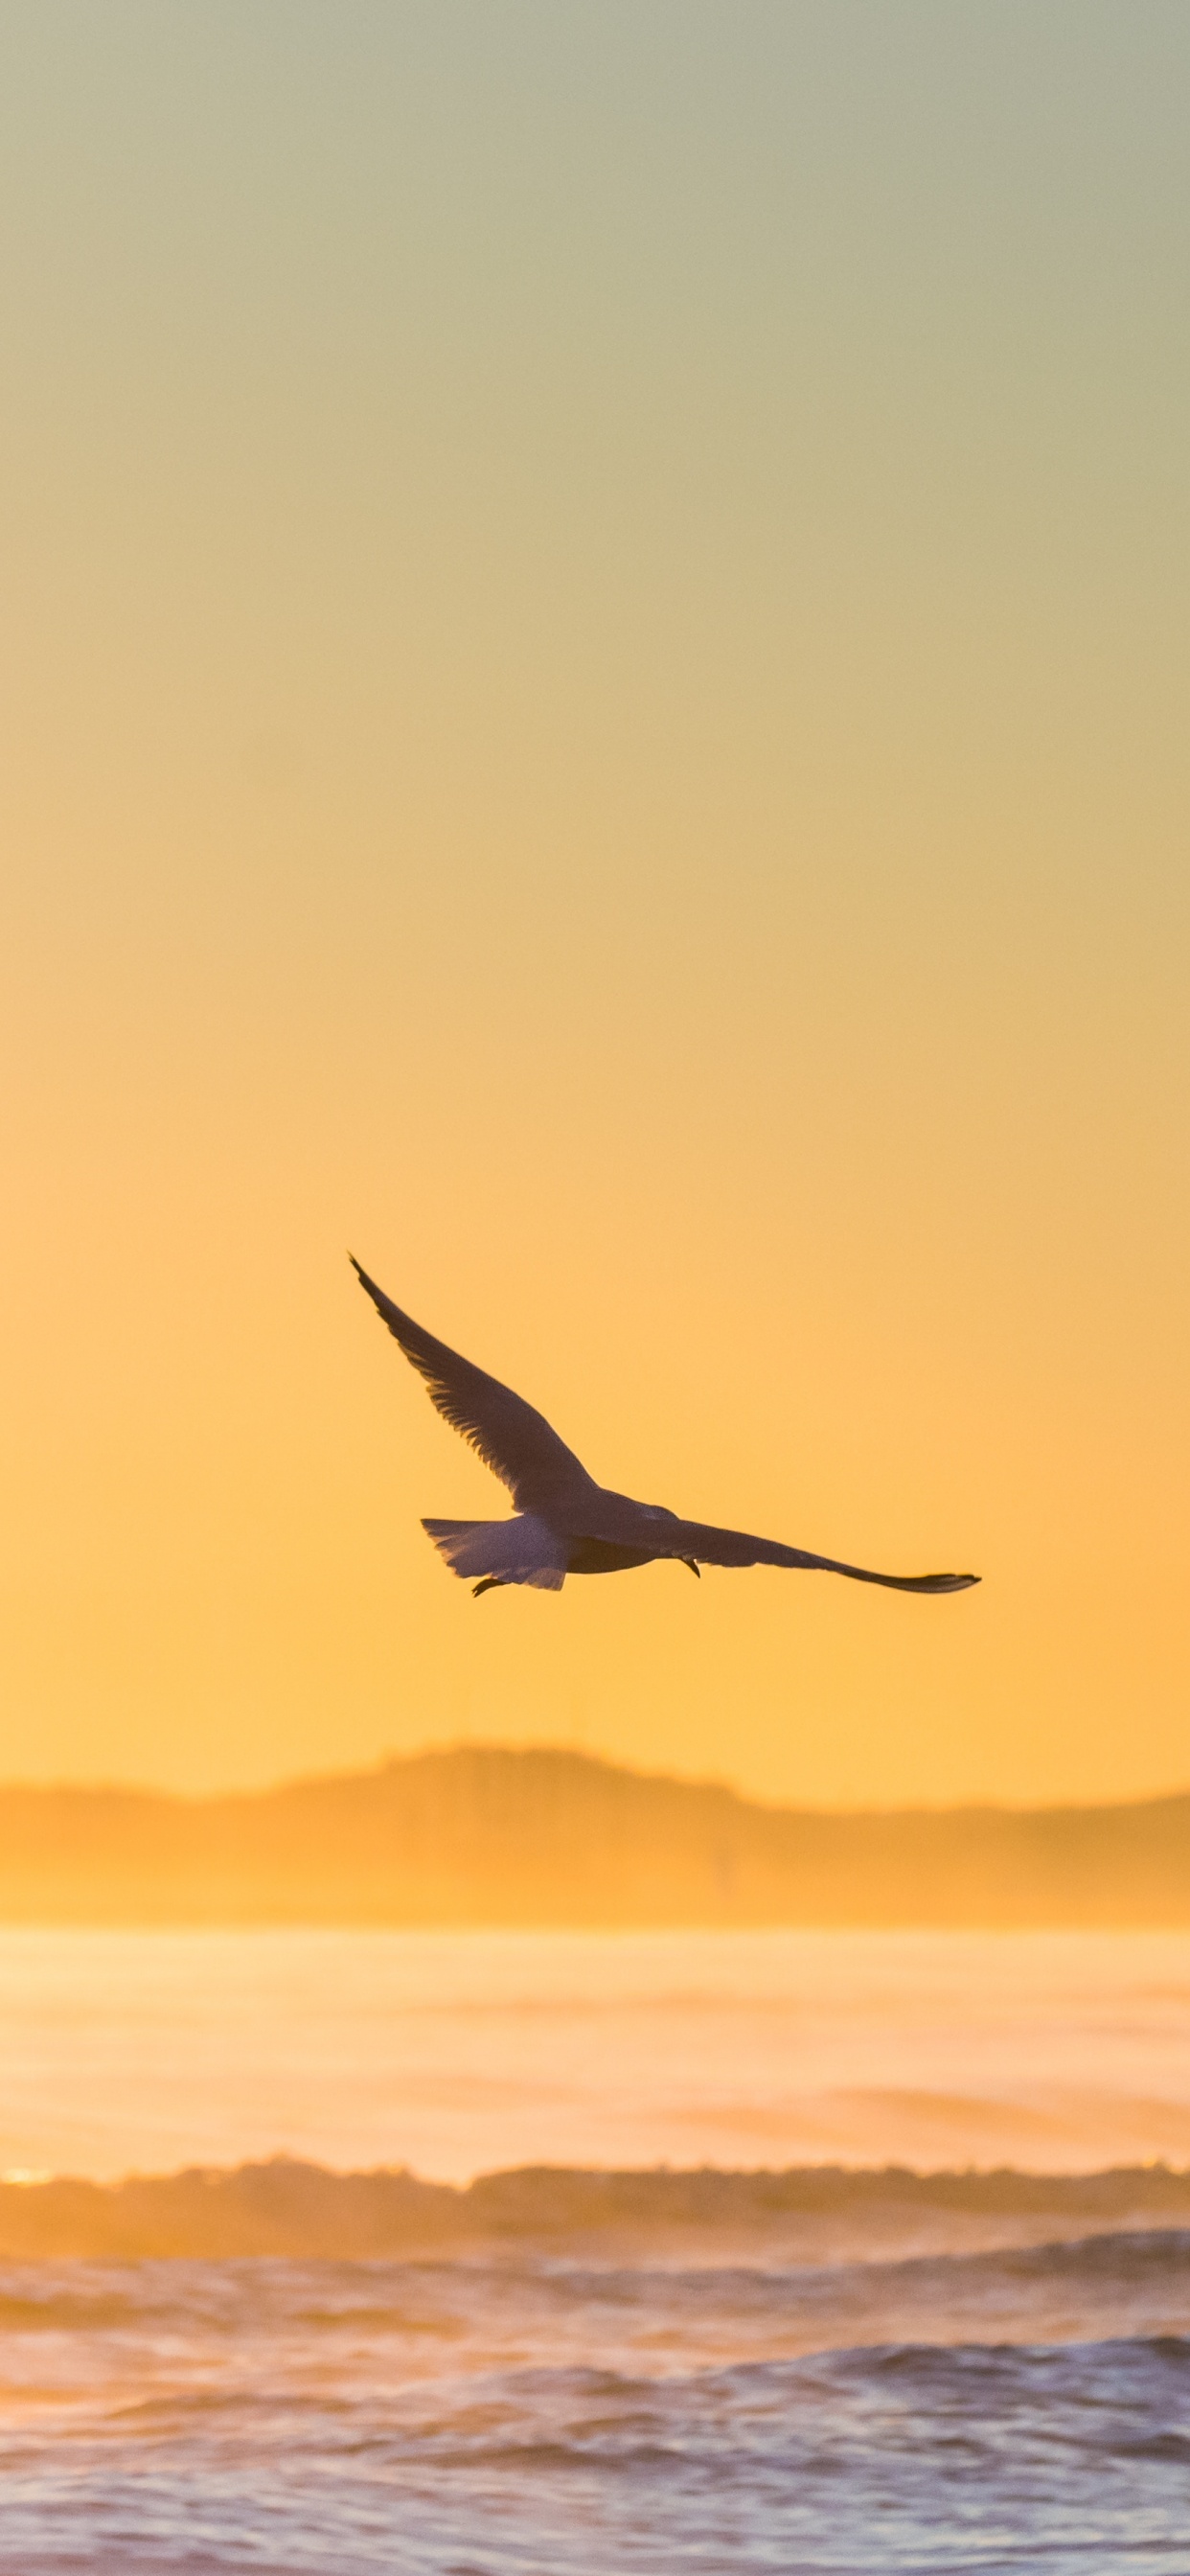 Bird Flying Over The Sea During Sunset. Wallpaper in 1242x2688 Resolution